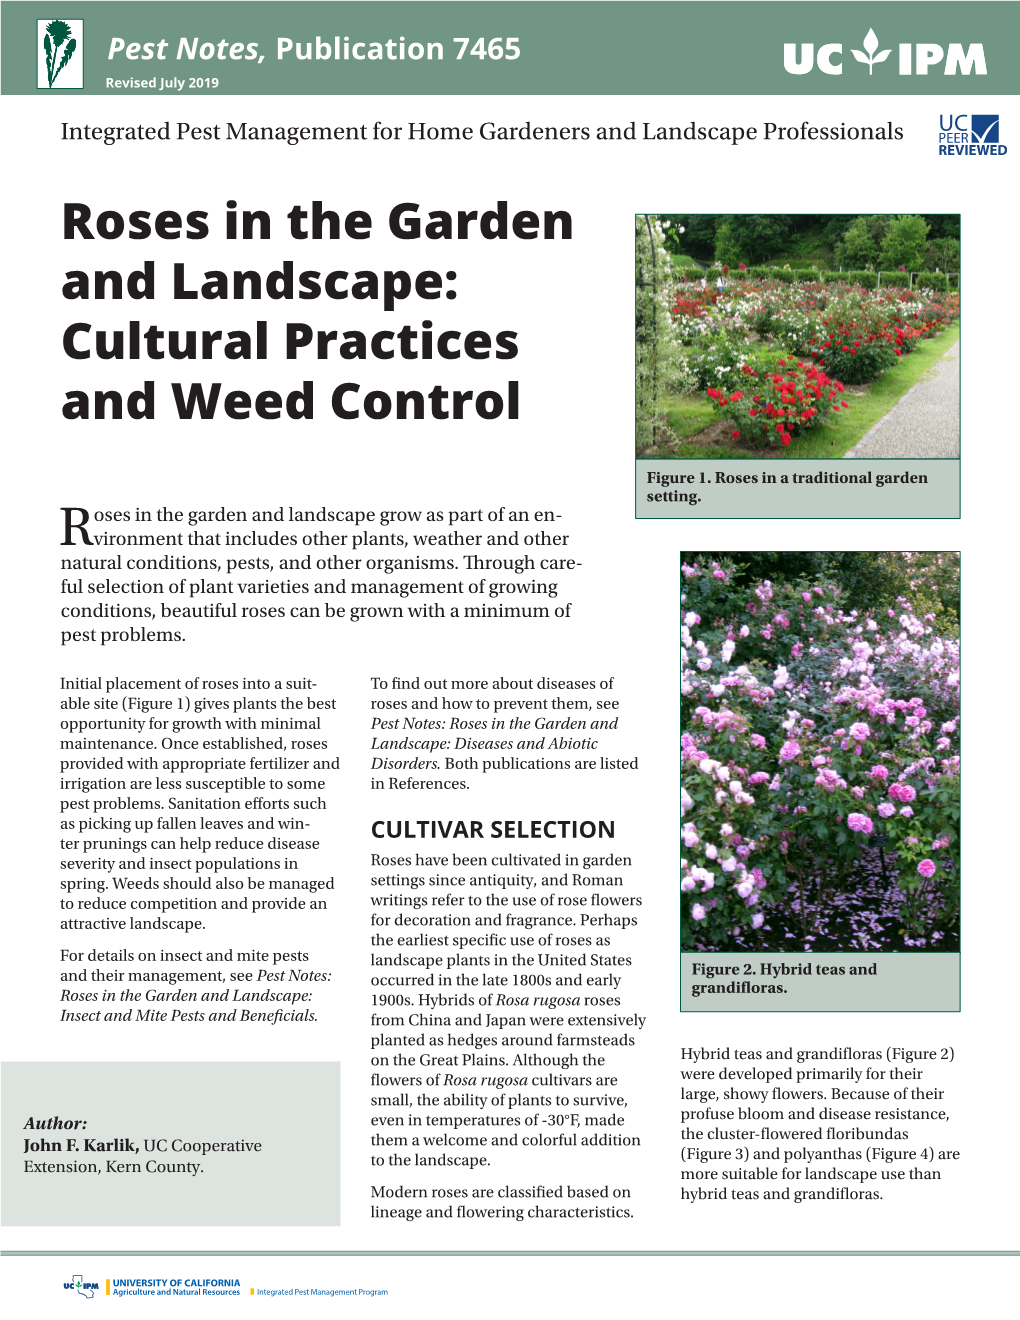 Roses in the Garden and Landscape: Cultural Practices and Weed Control